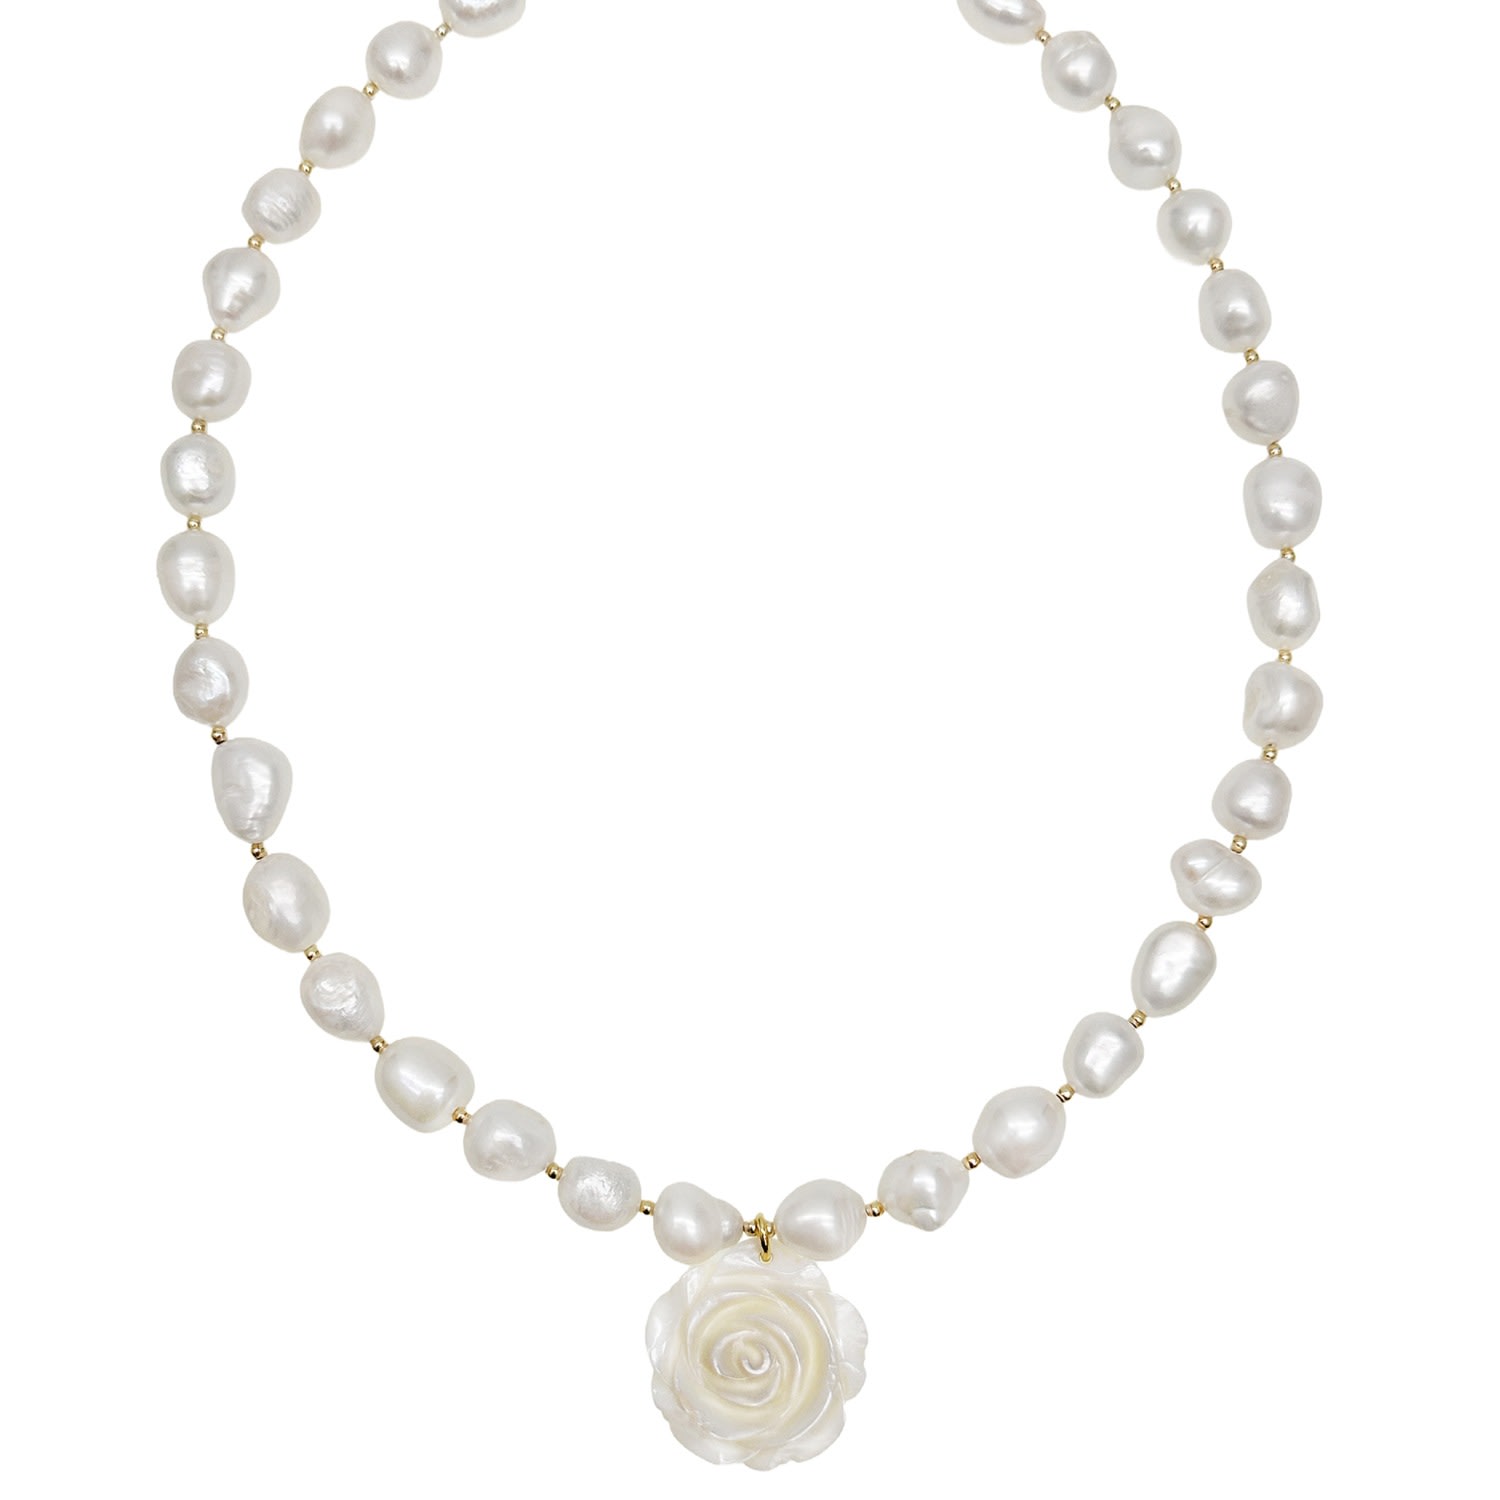 Farra Women's White Freshwater Pearls With Rose Pendant Choker Necklace